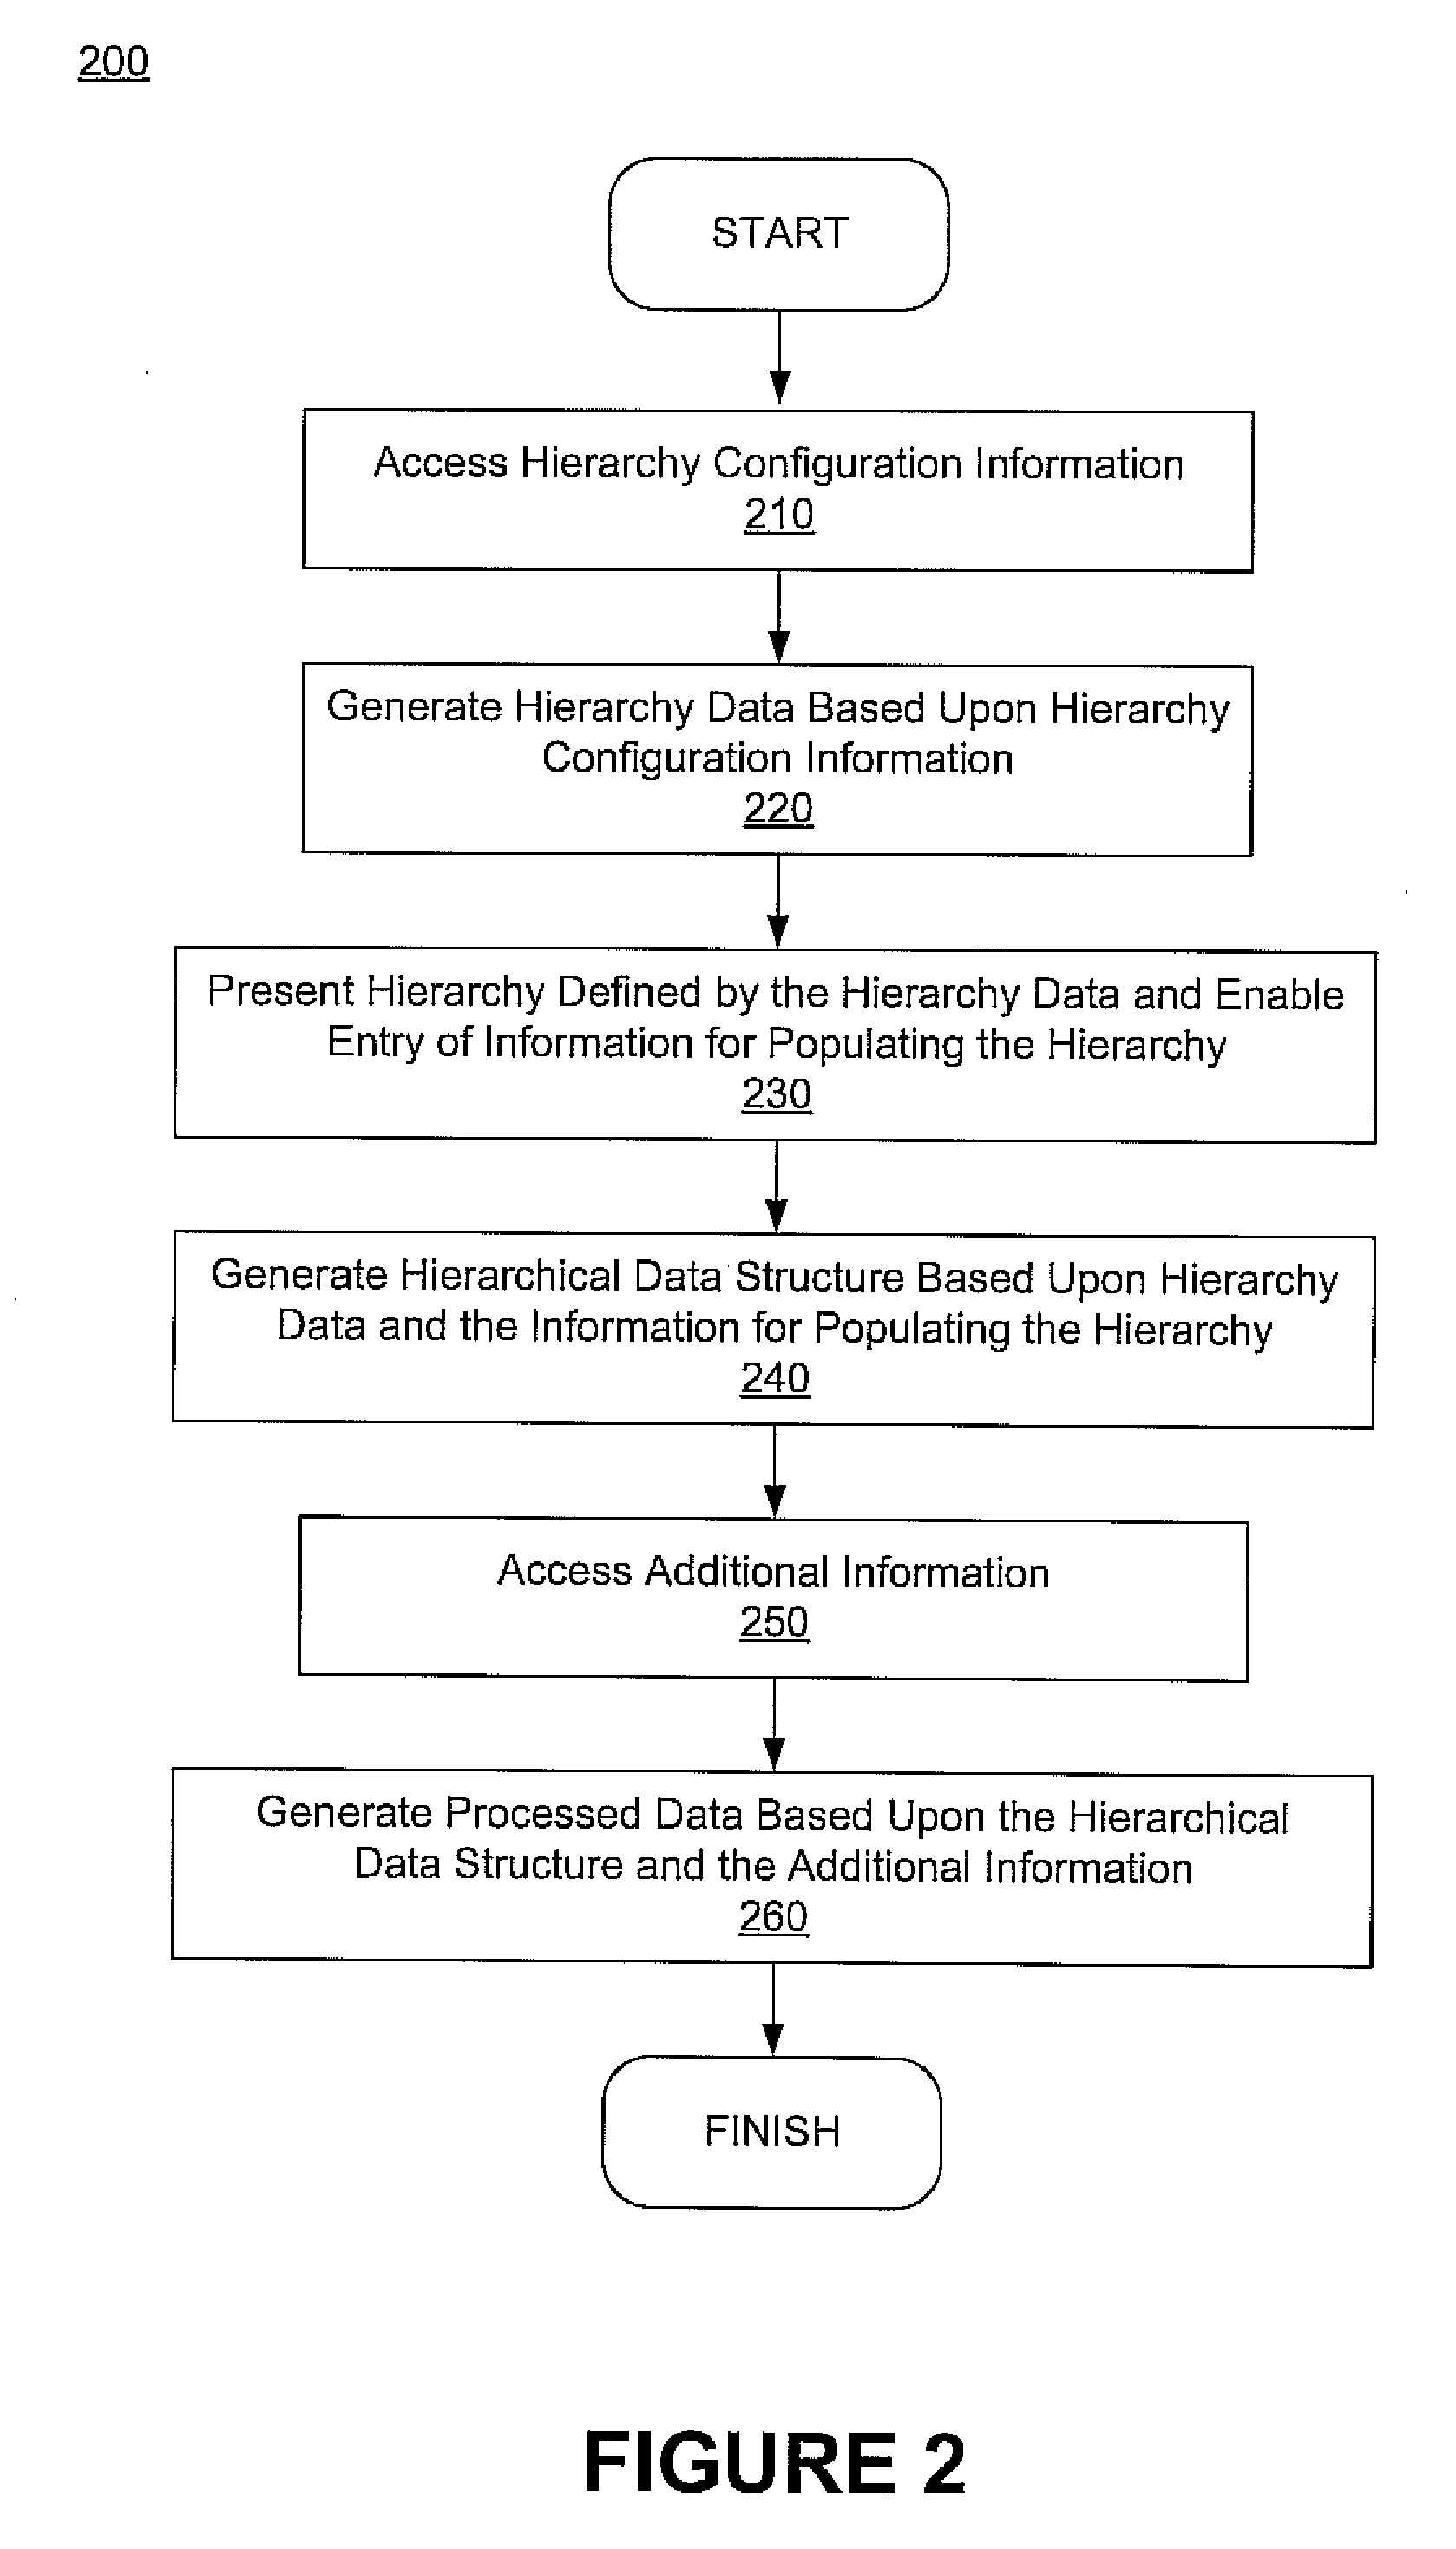 Method, system, and graphical user interface for presenting an interactive hierarchy and indicating entry of information therein